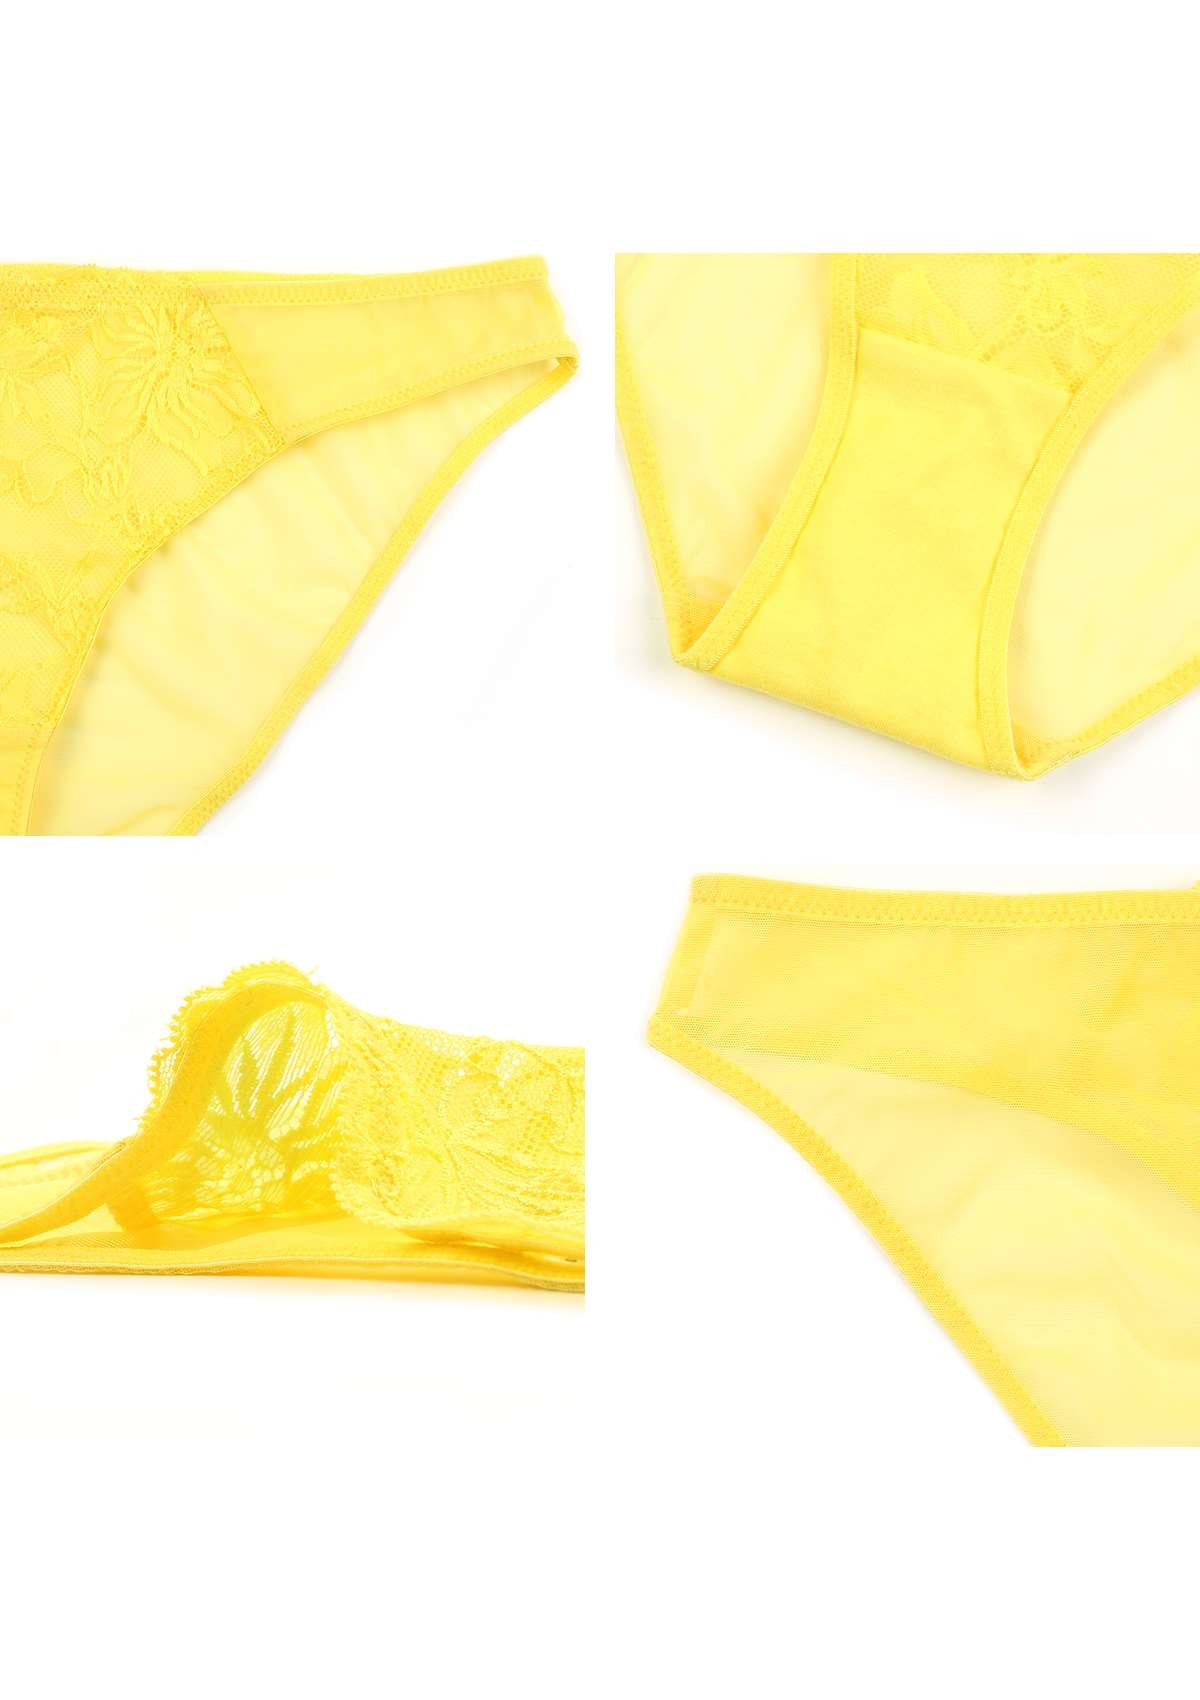 HSIA Mid-Rise Sexy Lace-Trimmed Delicate Breathable Underwear Panty - M / Bikini / Bright Yellow